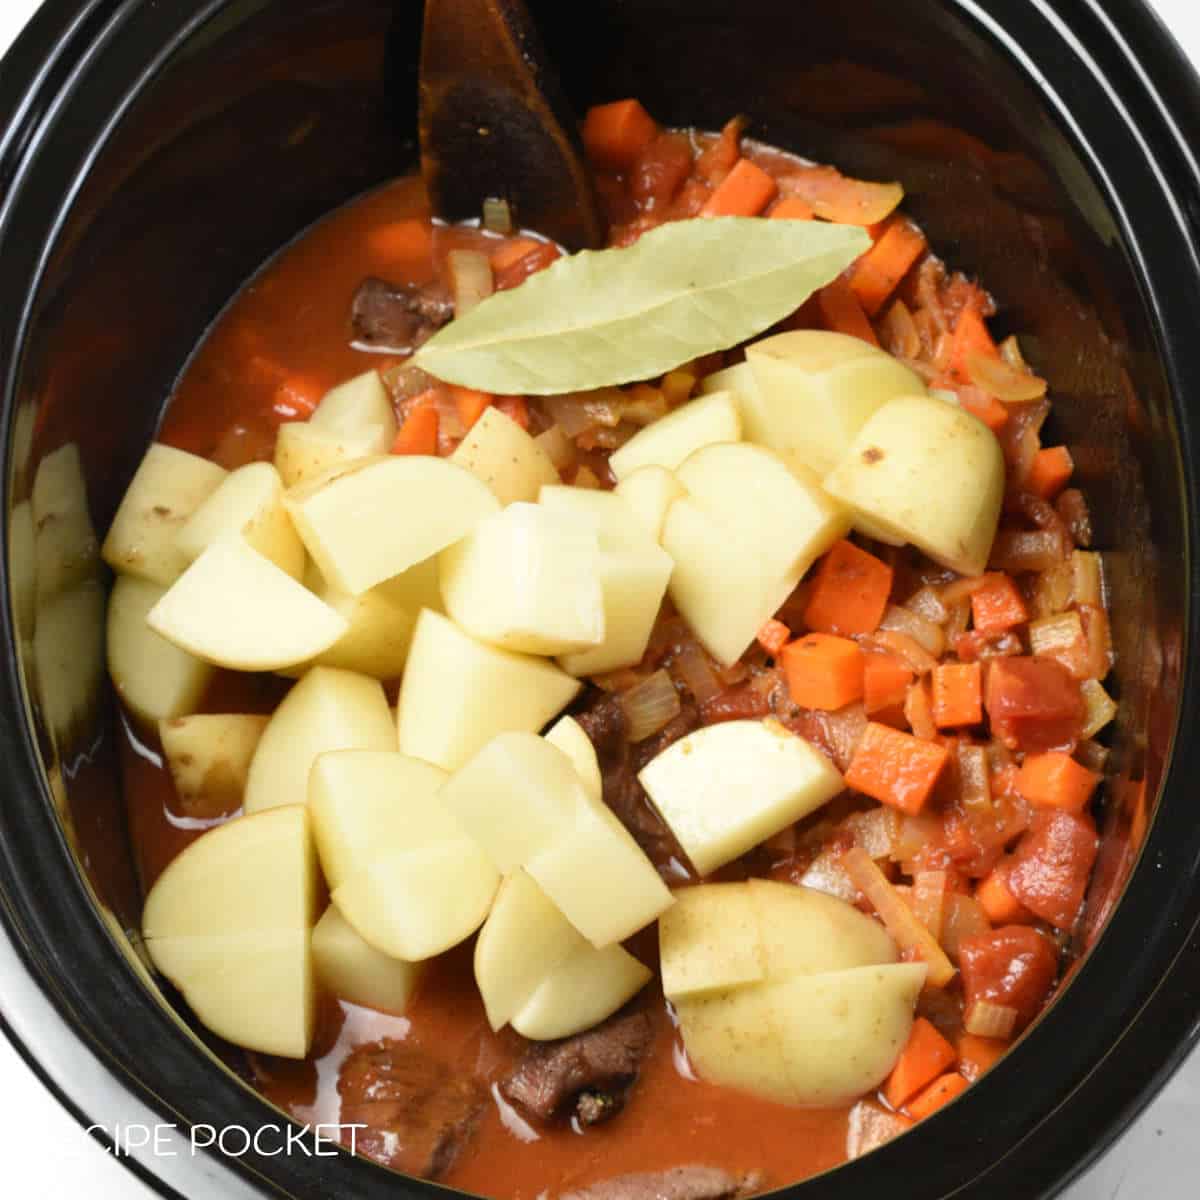 Potatoes, bay leaf, and other ingredients in a slow cooker bowl.